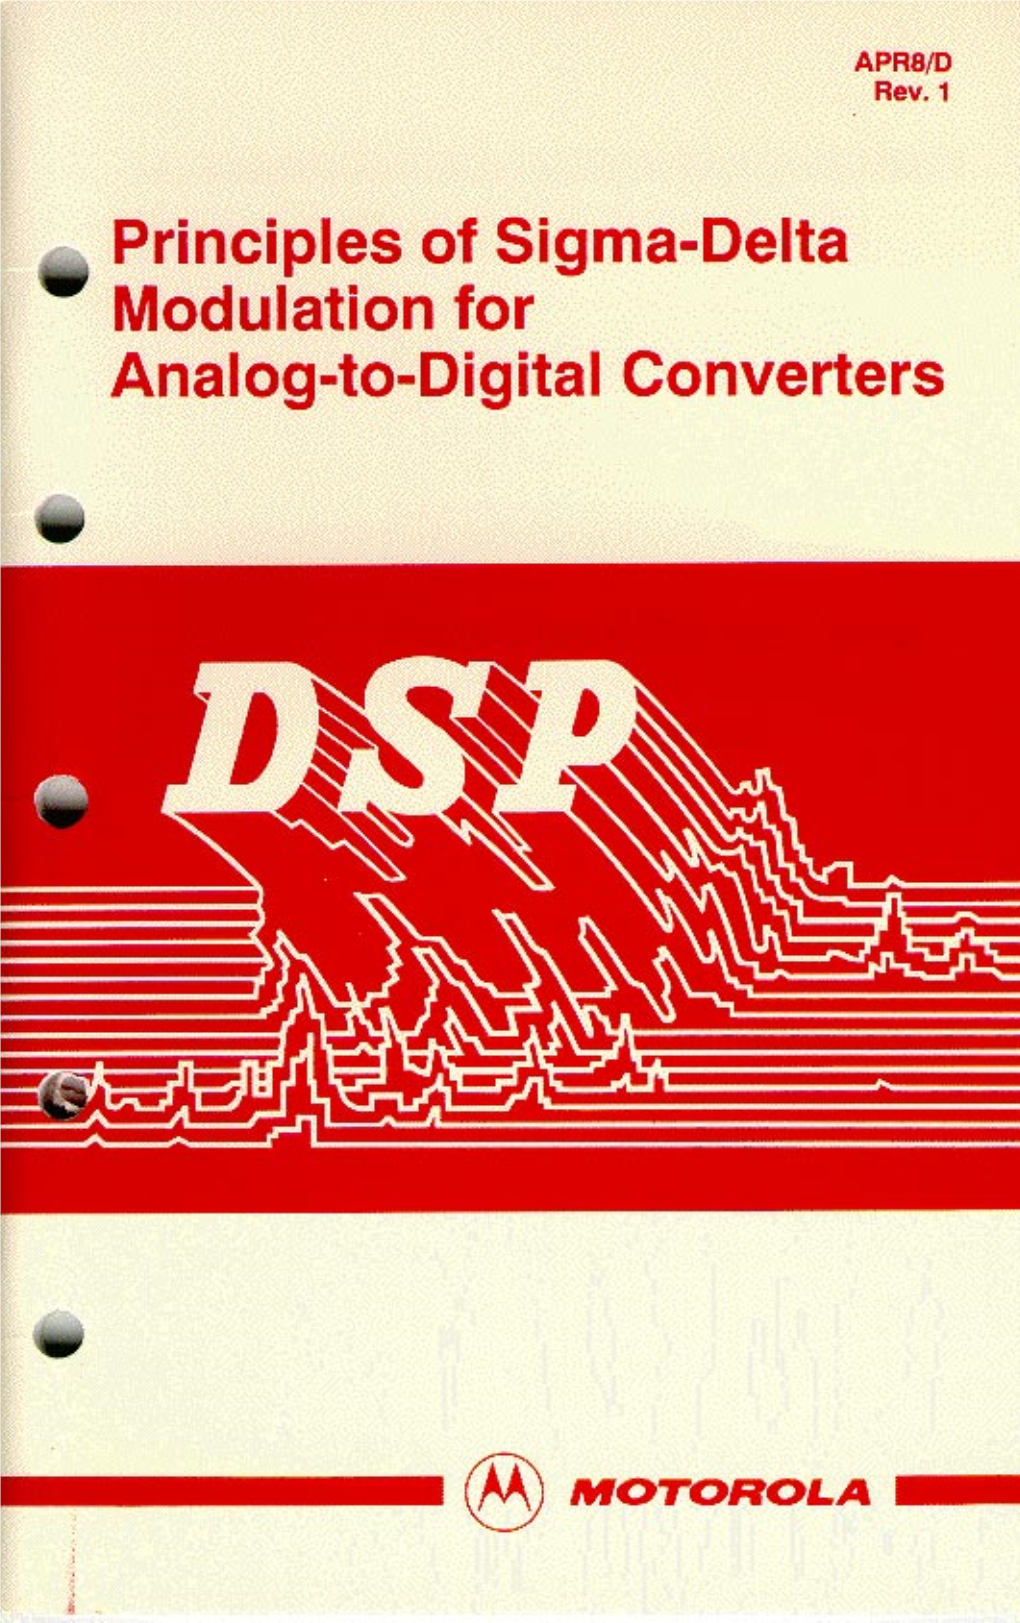 Principles of Sigma-Delta Modulation for Analog-To-Digital Converters